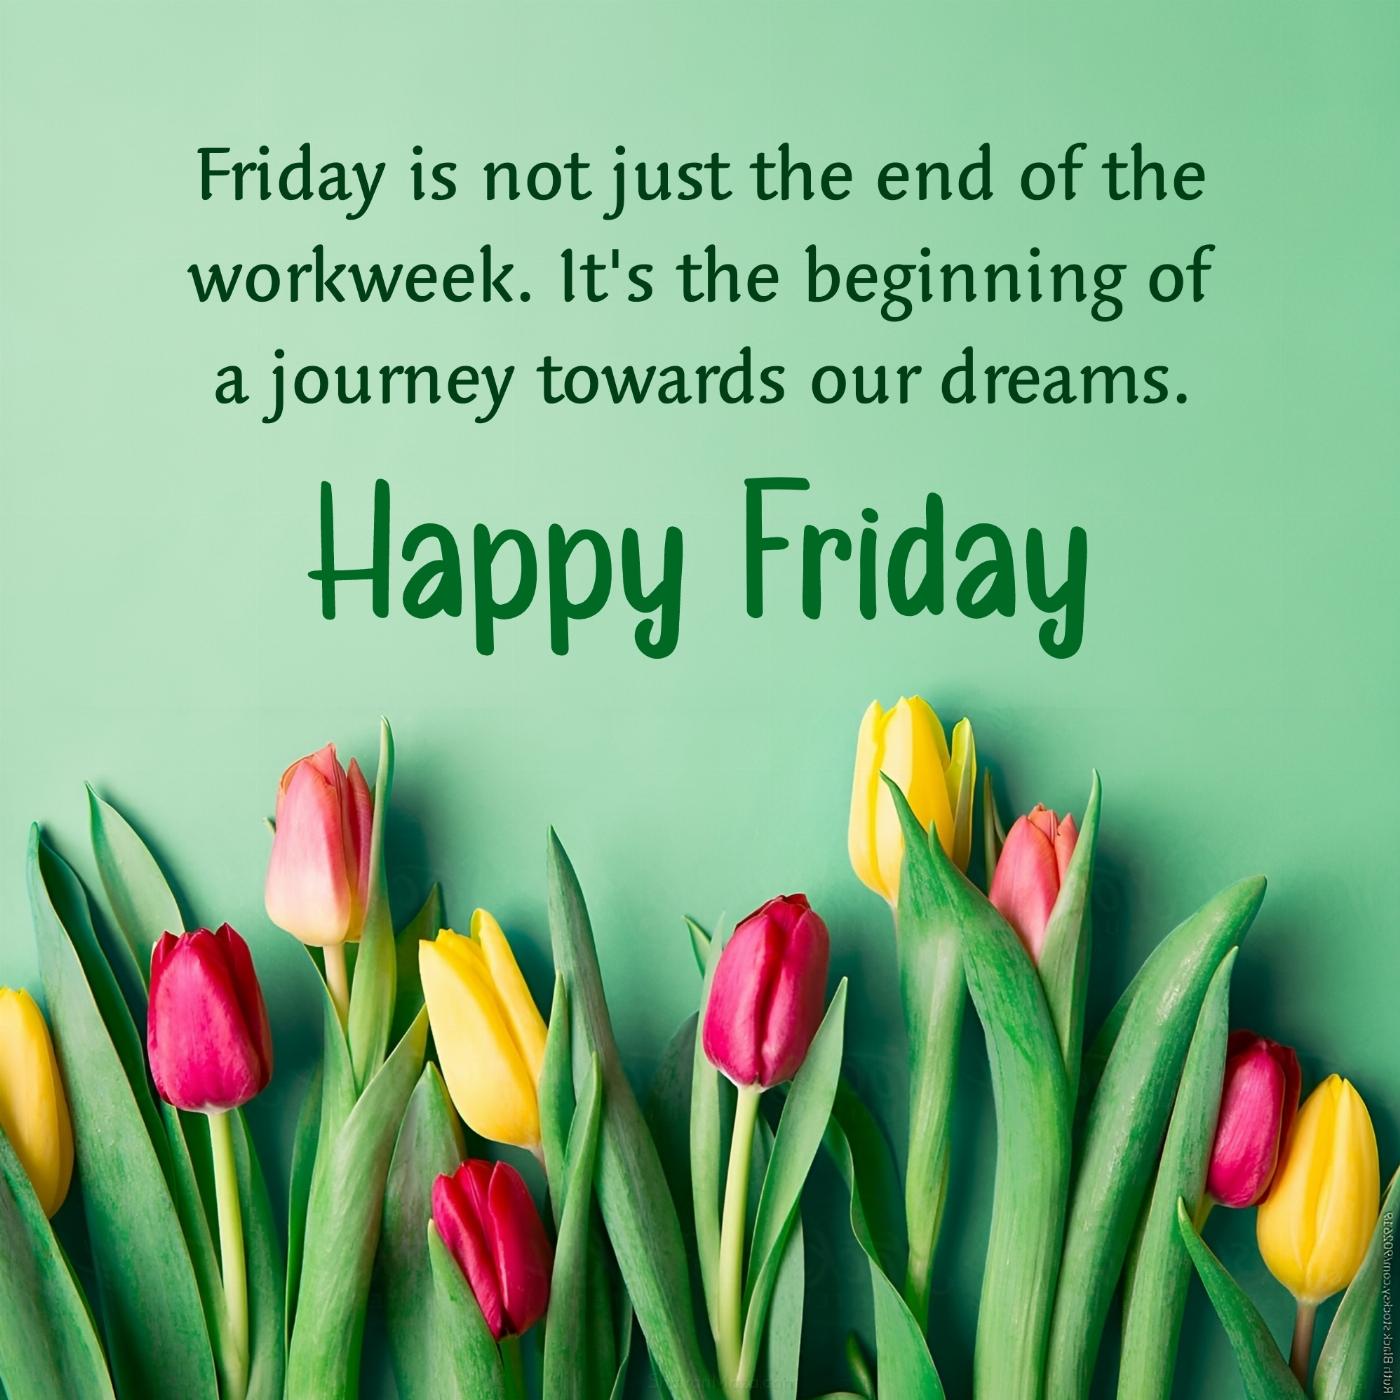 Friday is not just the end of the workweek